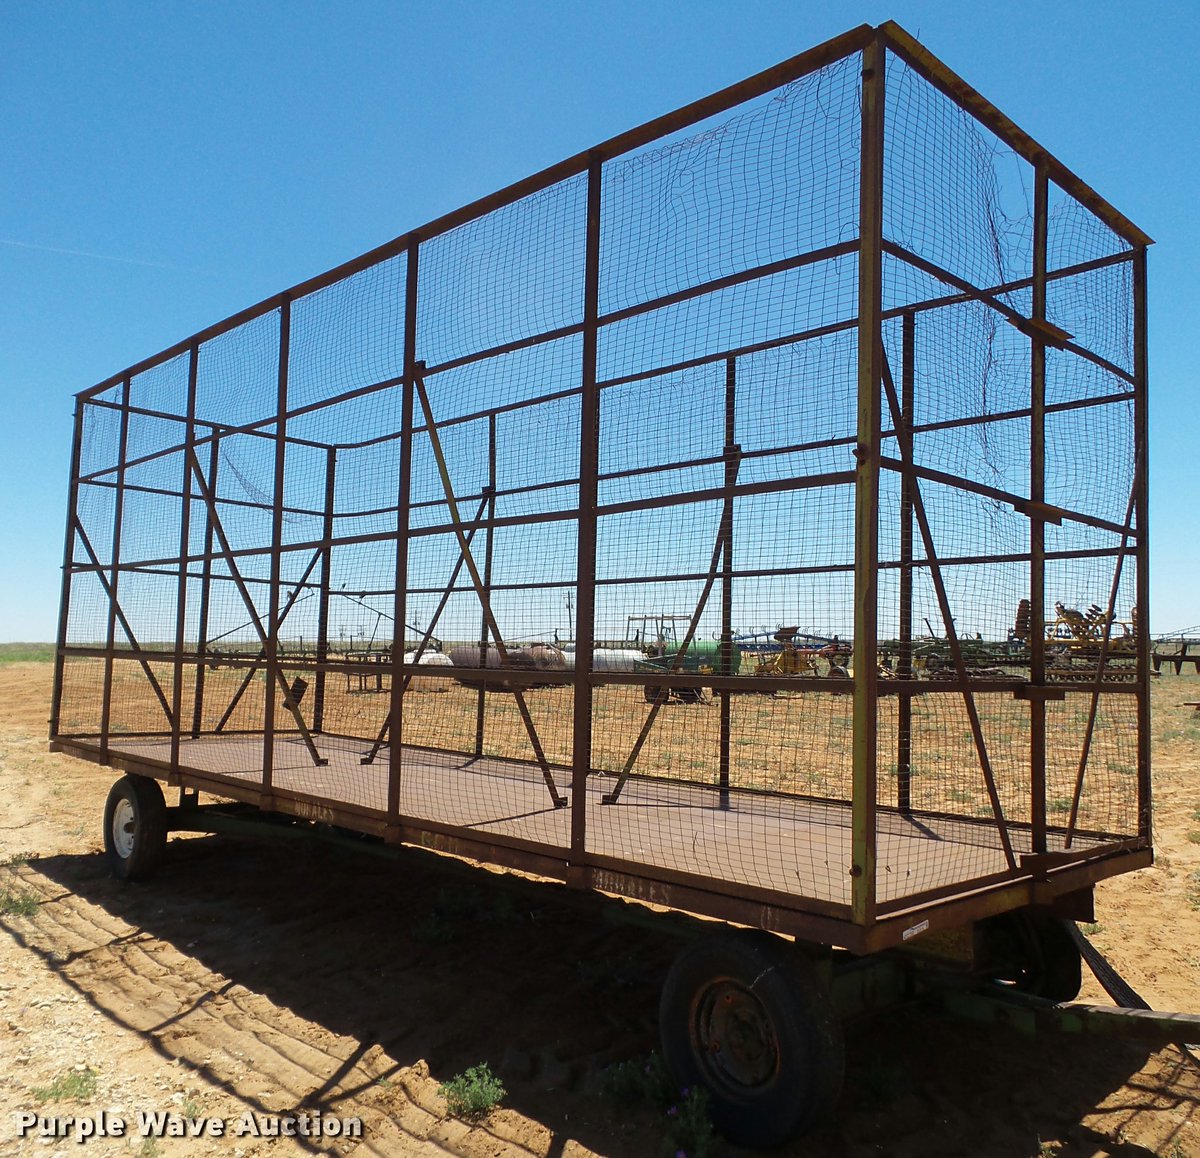 He'd personally drive a trailer train of old flat bed cotton trailers to pick up migrants at the TX border, then take them back in these trailers, also called chicken coop trailersHumans literally in commodity cages. For hundreds of miles.White supremacy. And common.12/